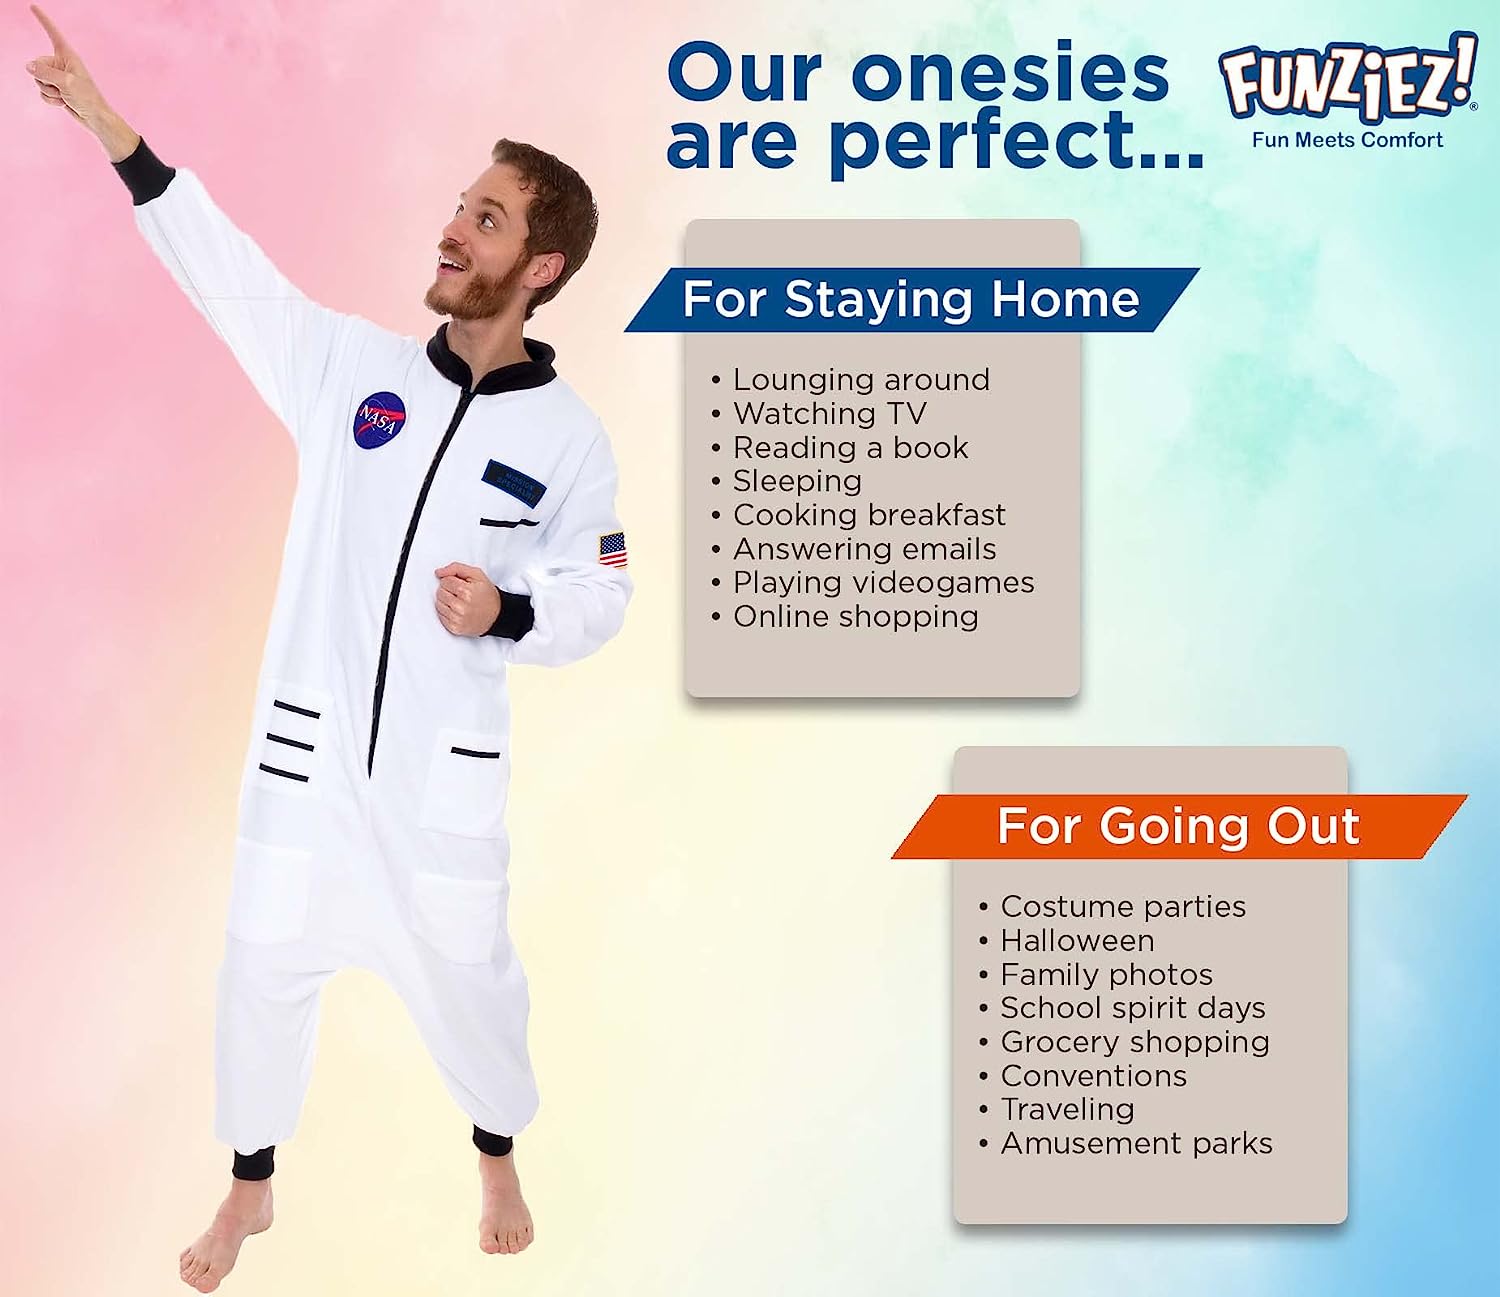 Astronaut One Piece Adult Space Jumpsuit Cosplay Costume